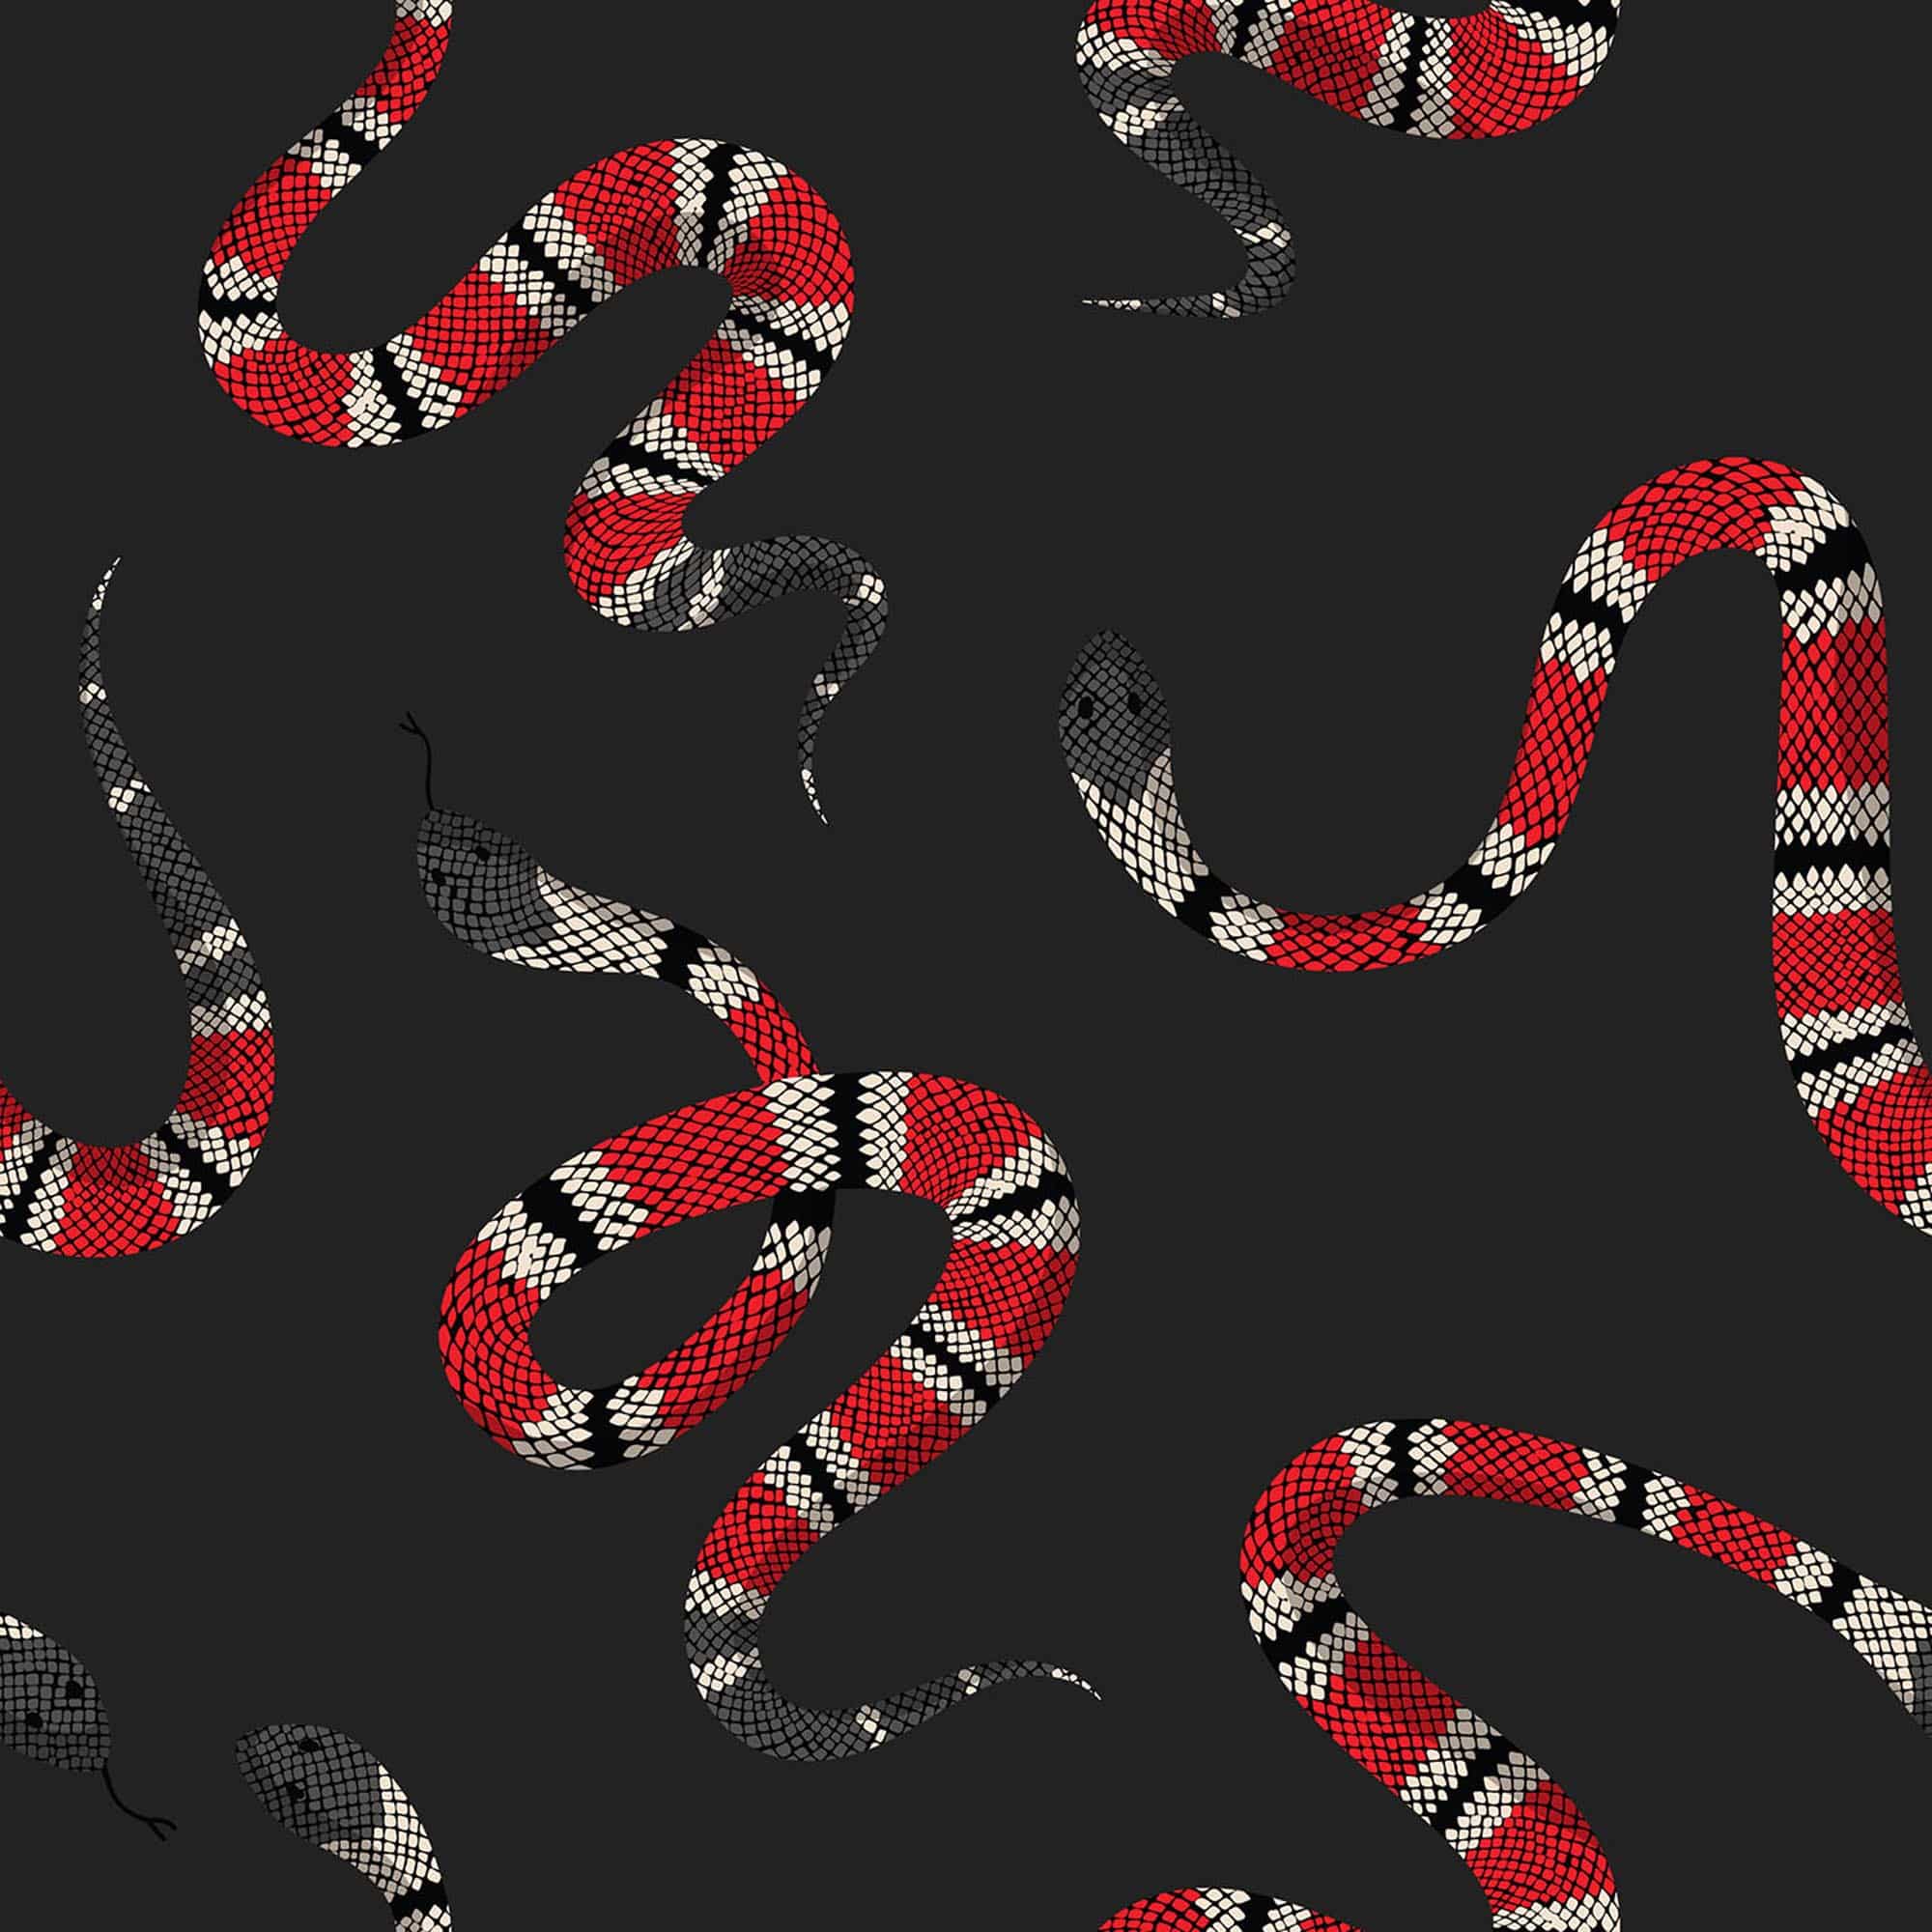 A pattern of red and black snakes on a black background - Snake